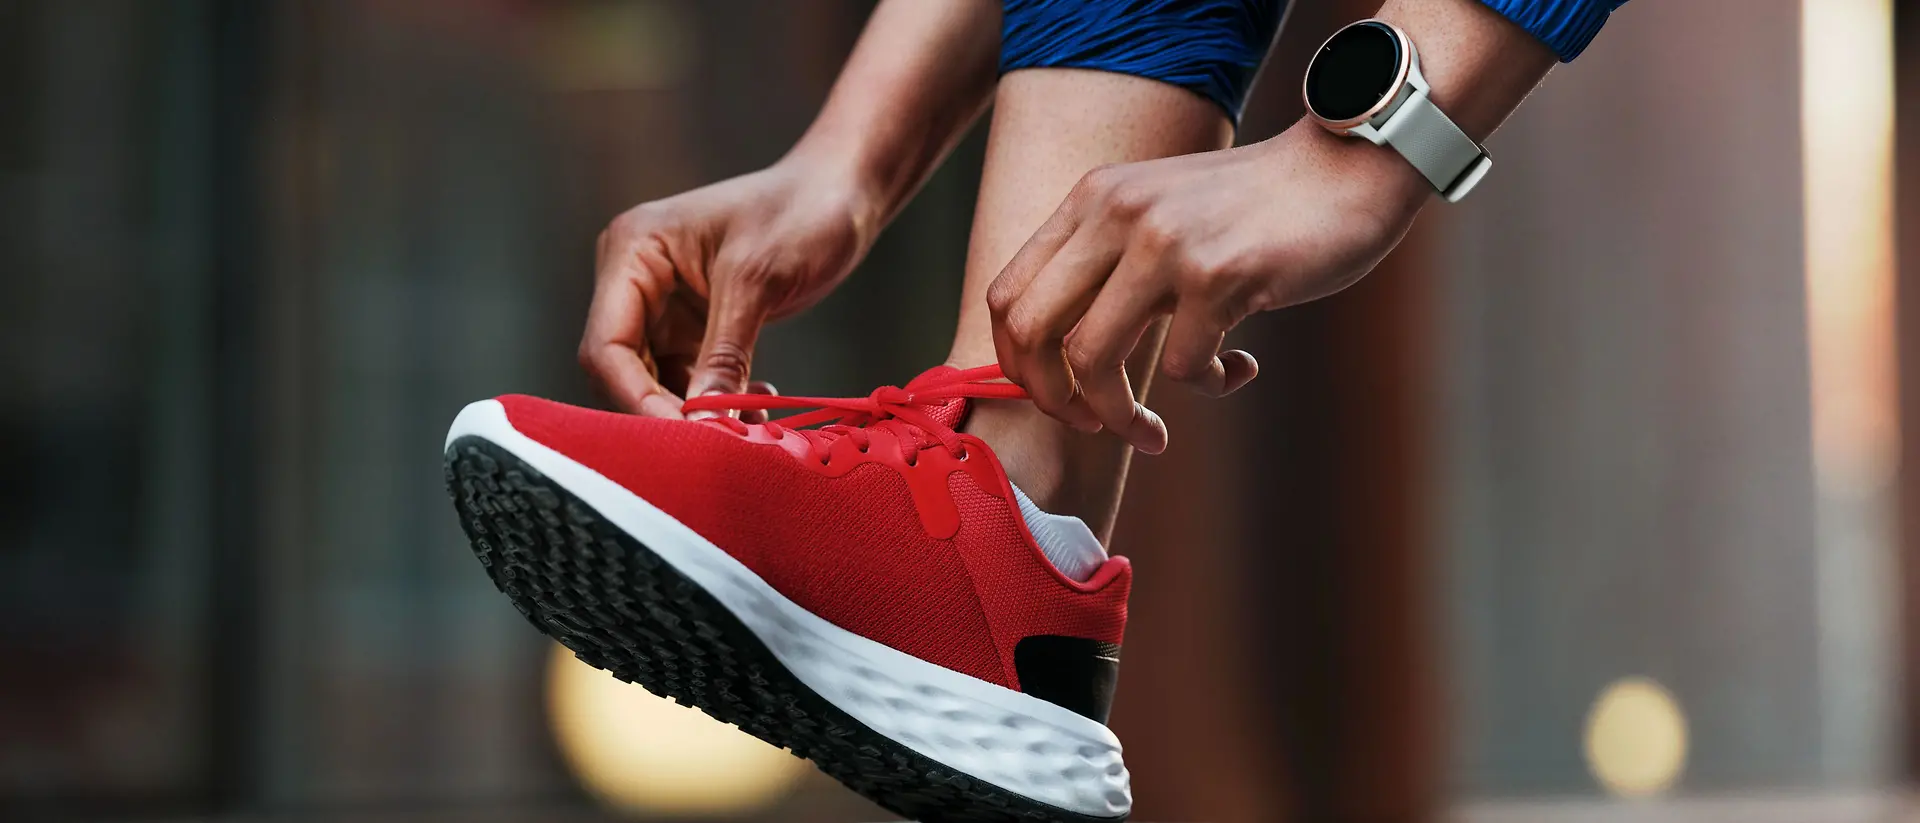 A person lacing up sports shoes bonded with solutions from Henkel Adhesive Technologies and wearing a smartwatch.